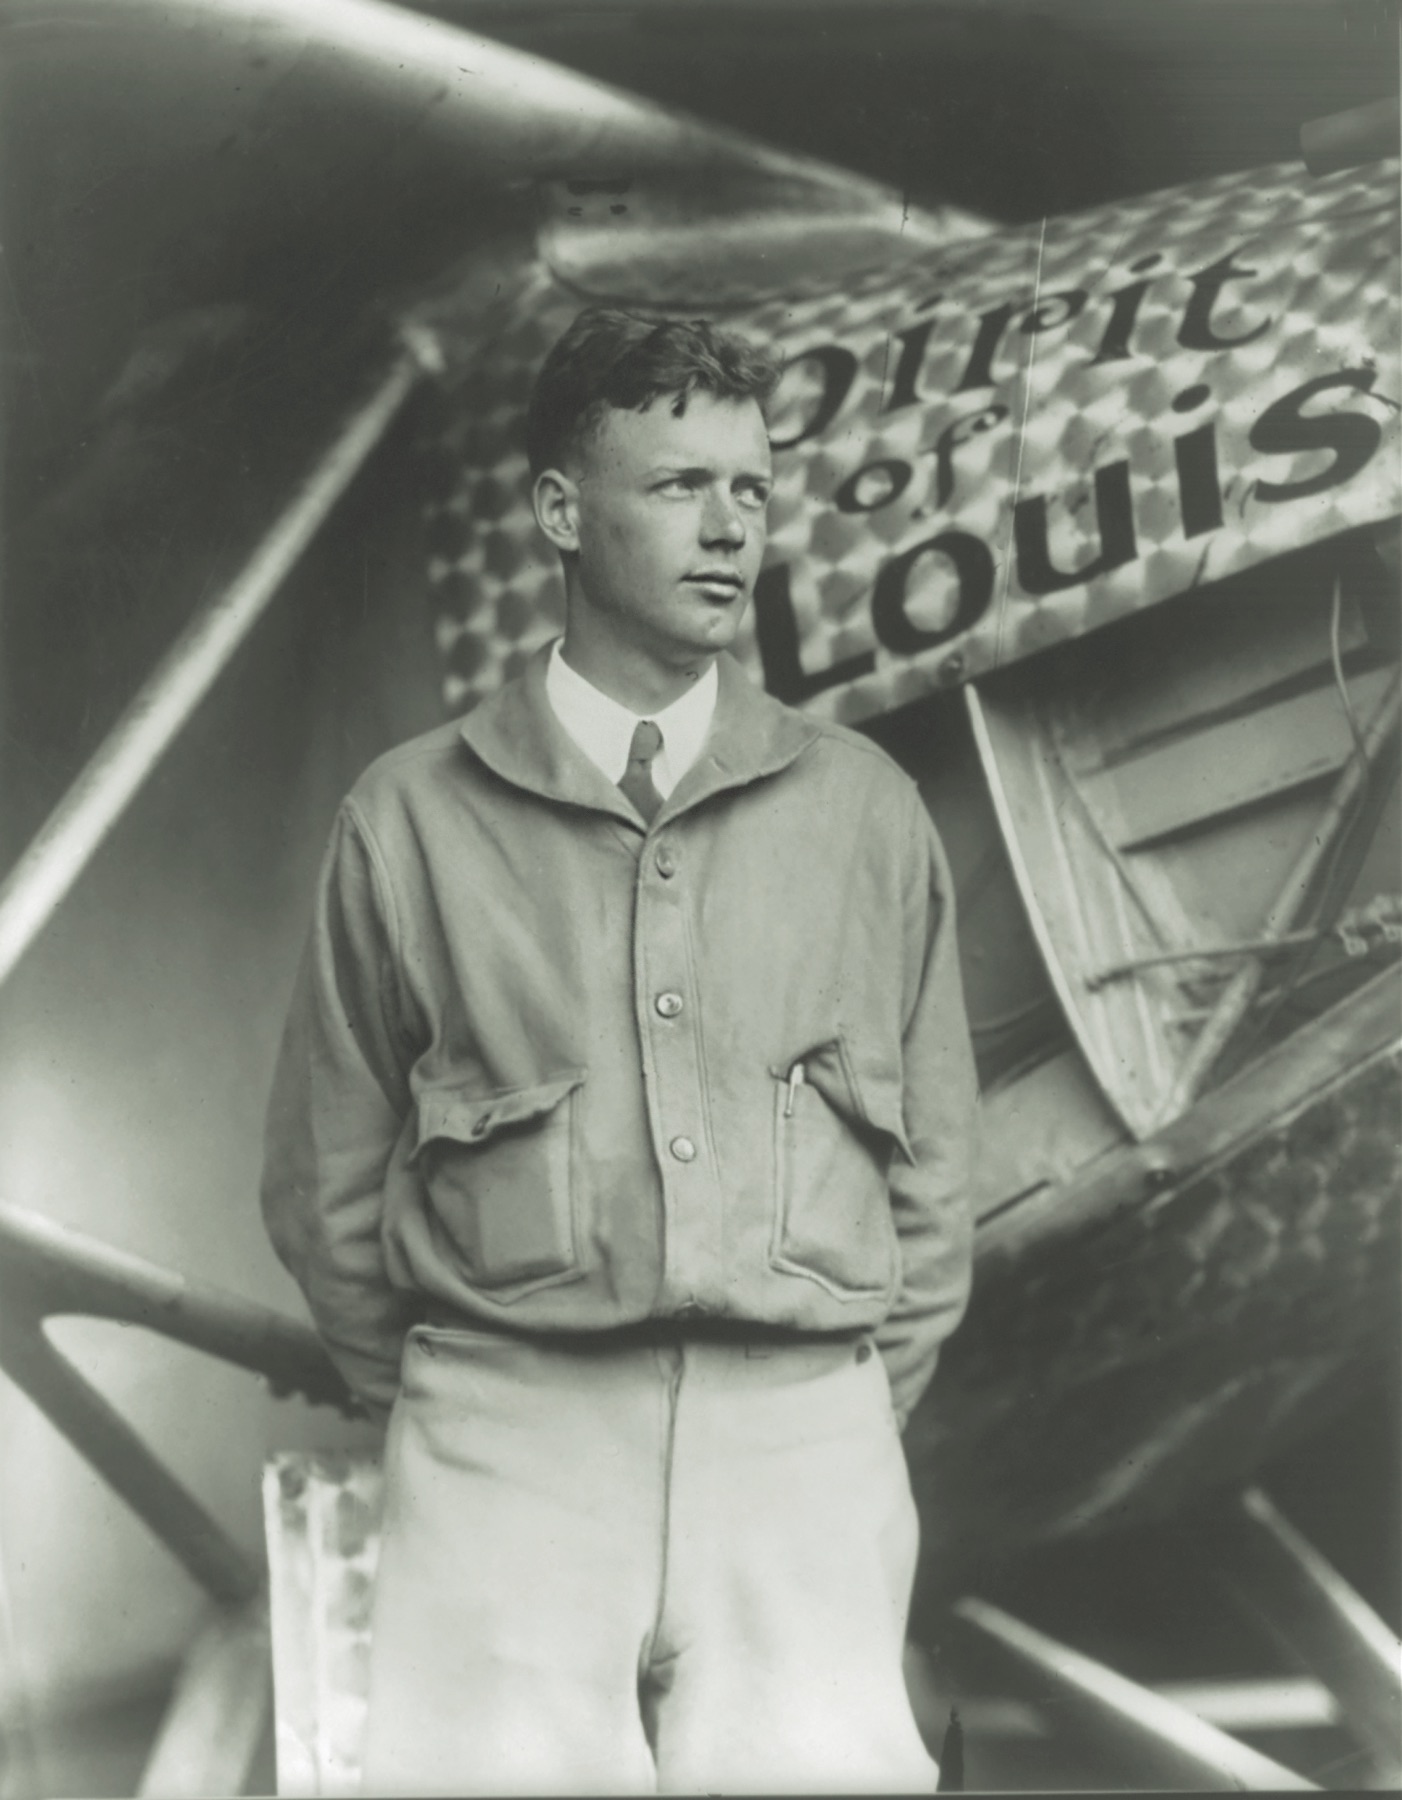 Charles Lindbergh saw “ghostly presences” on his solo flight across the Atlantic in 1927. (Library of Congress)